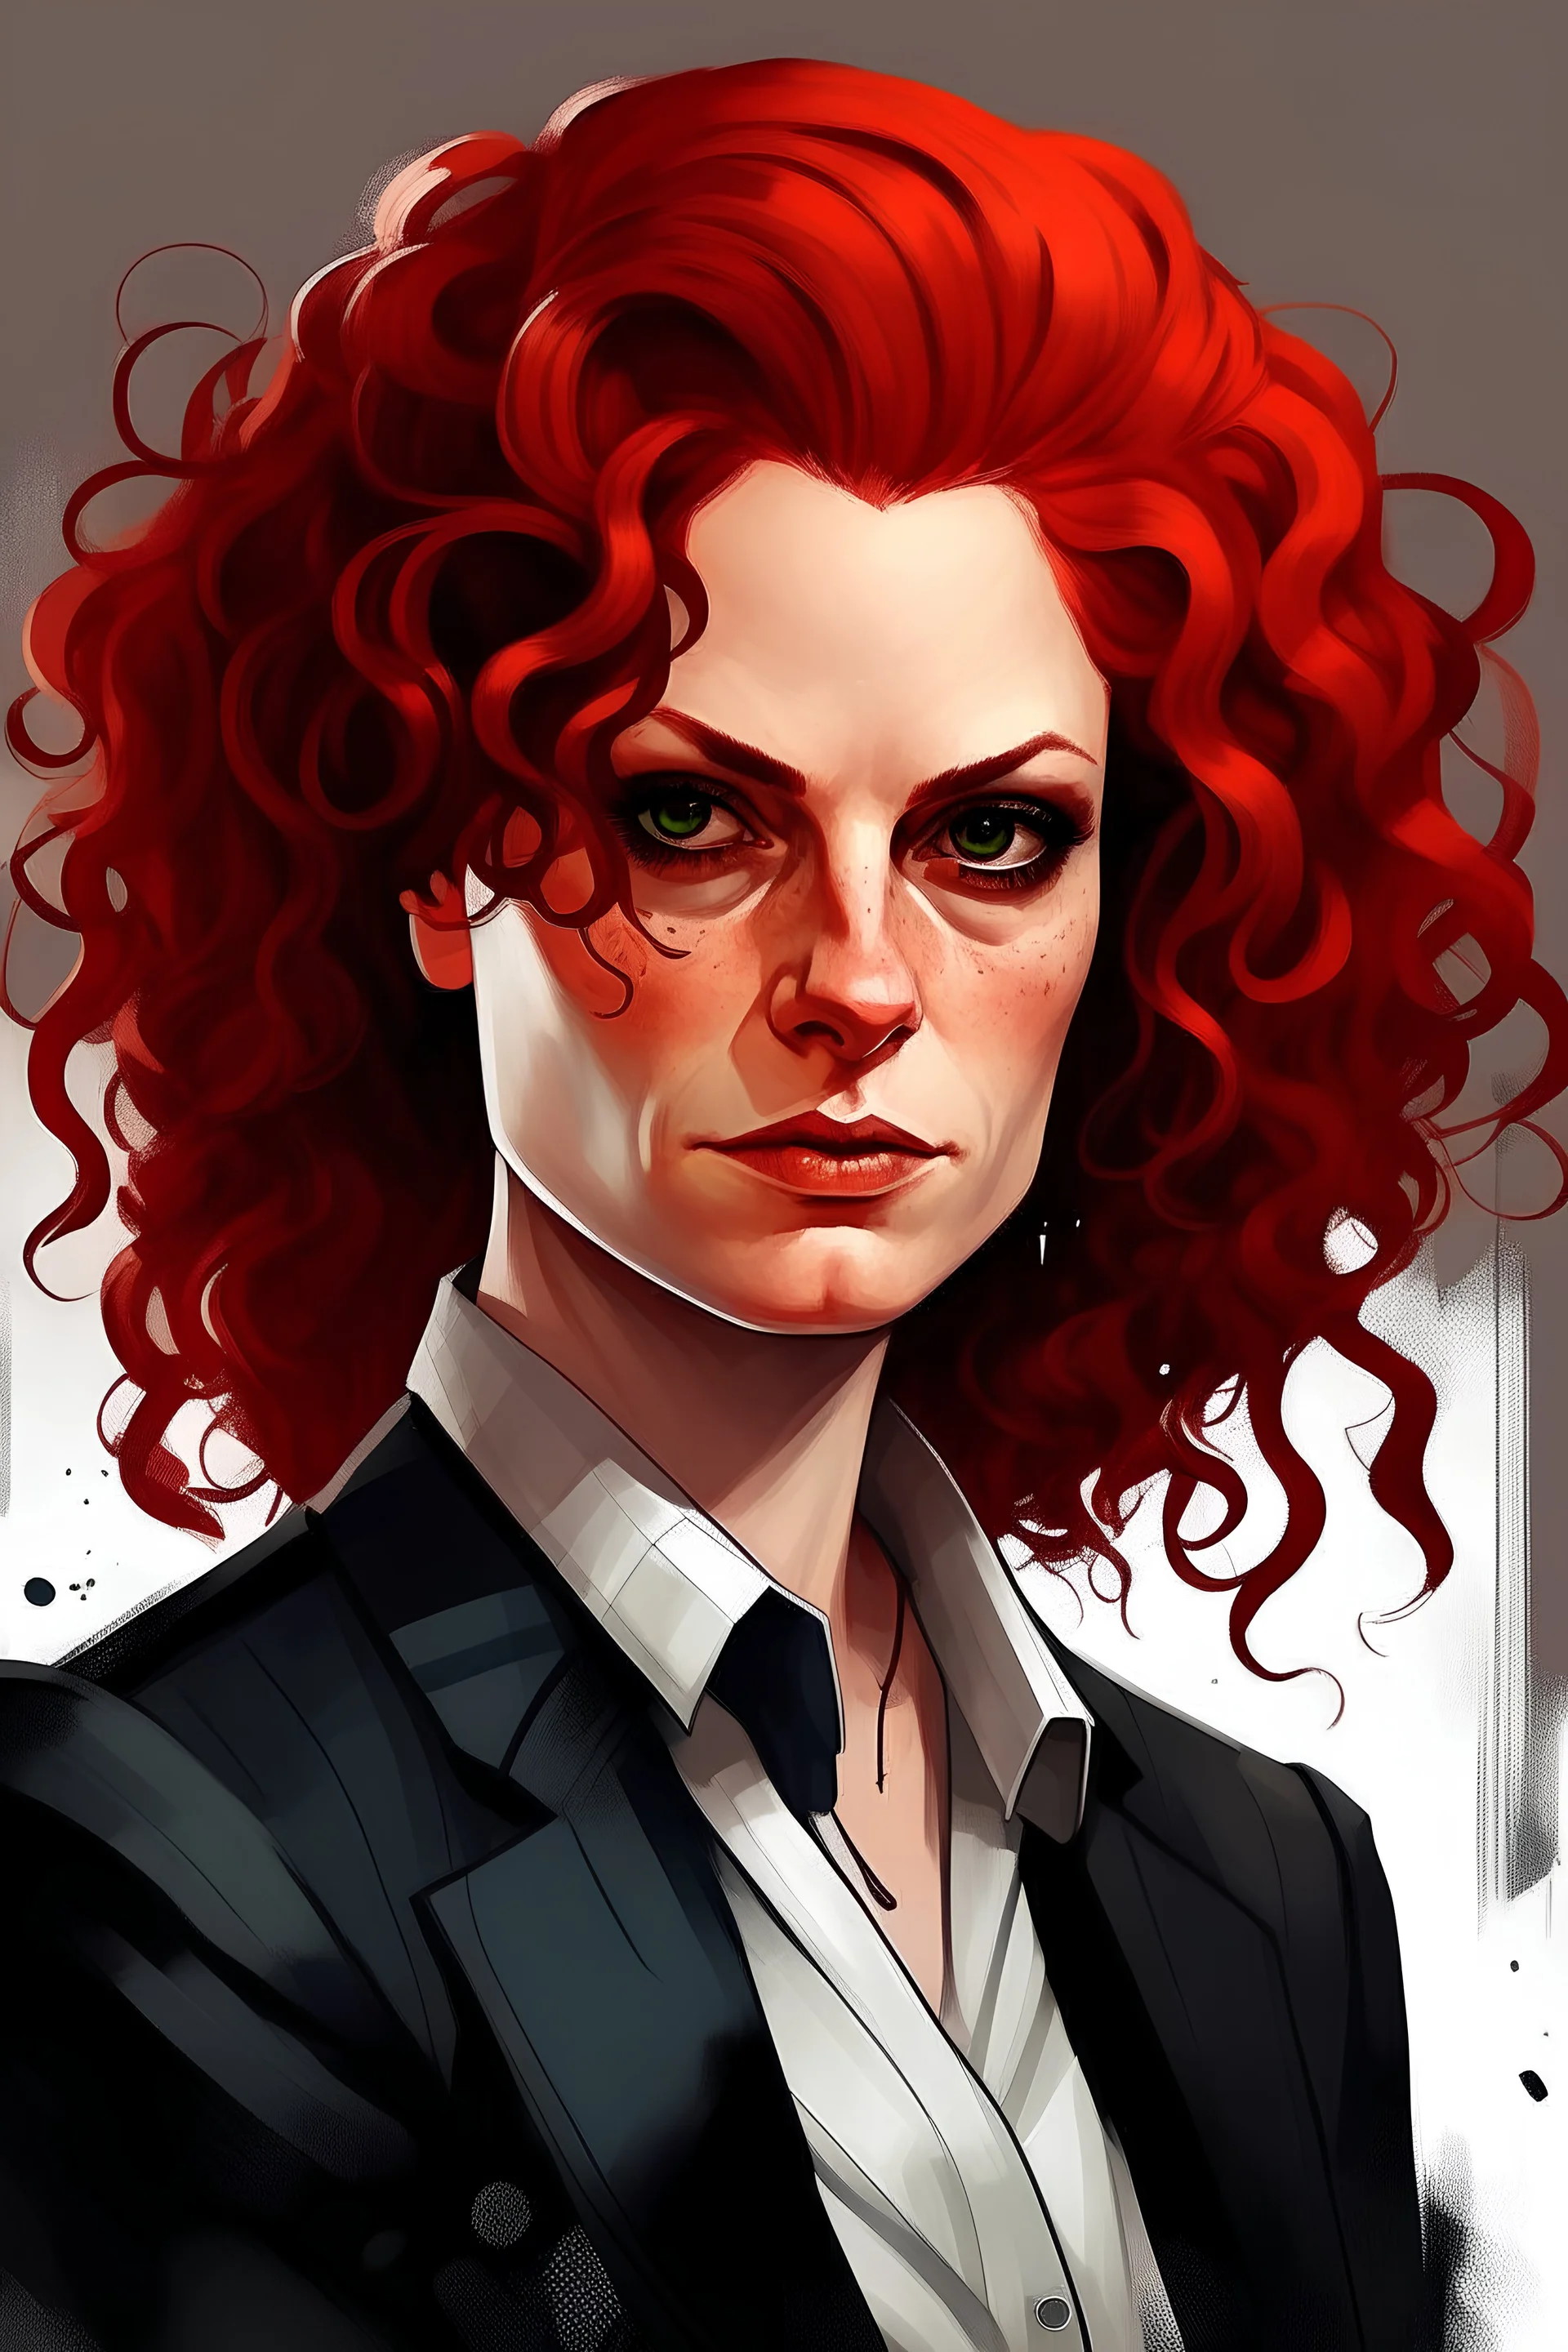 crime city, female portrait, mob boss, curly red hair